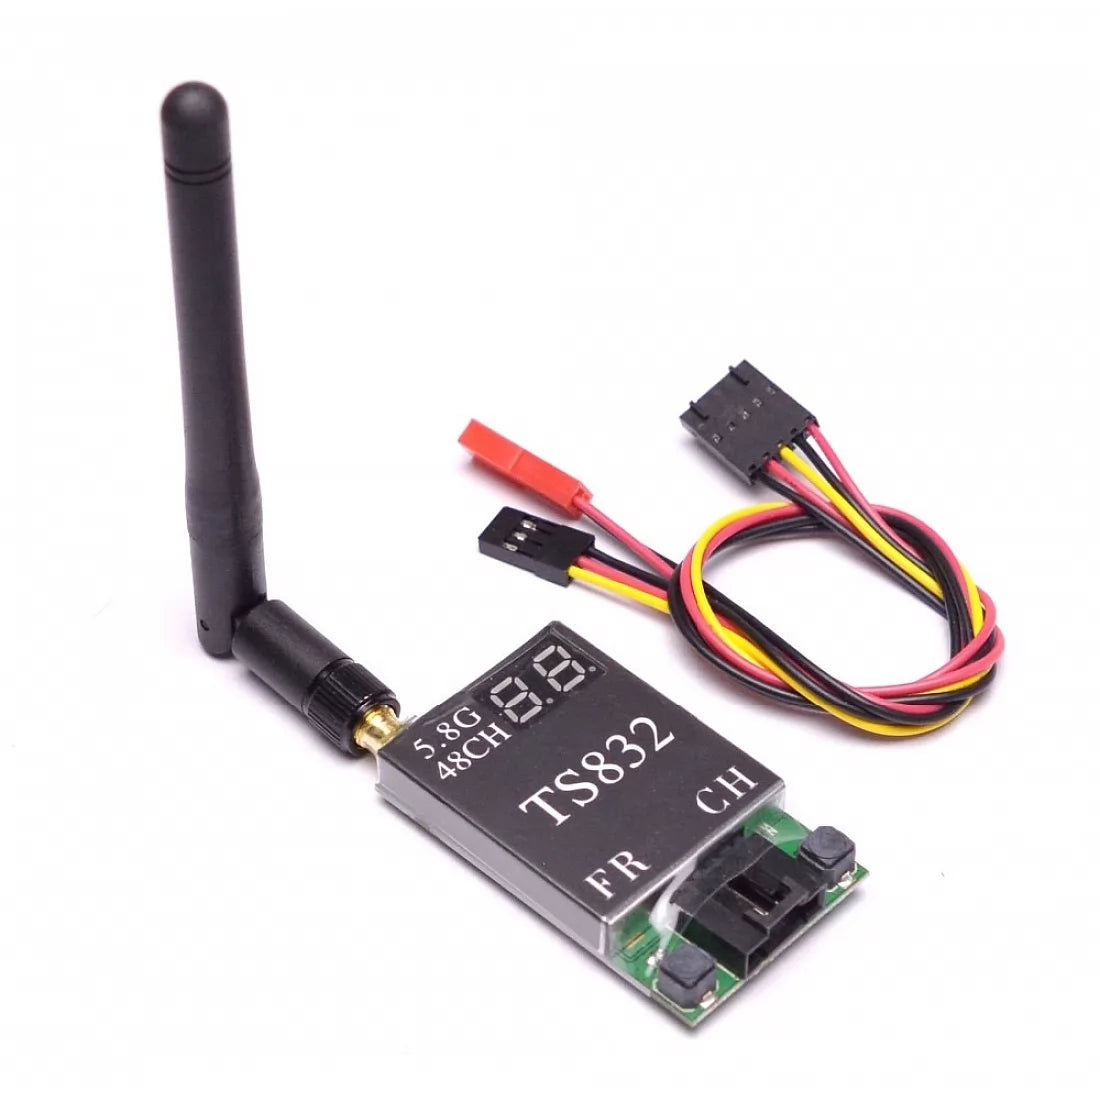 TS832 FPV 5.8G 600MW 48CH Wireless Audio Video Transmitter For Drone (Premium)